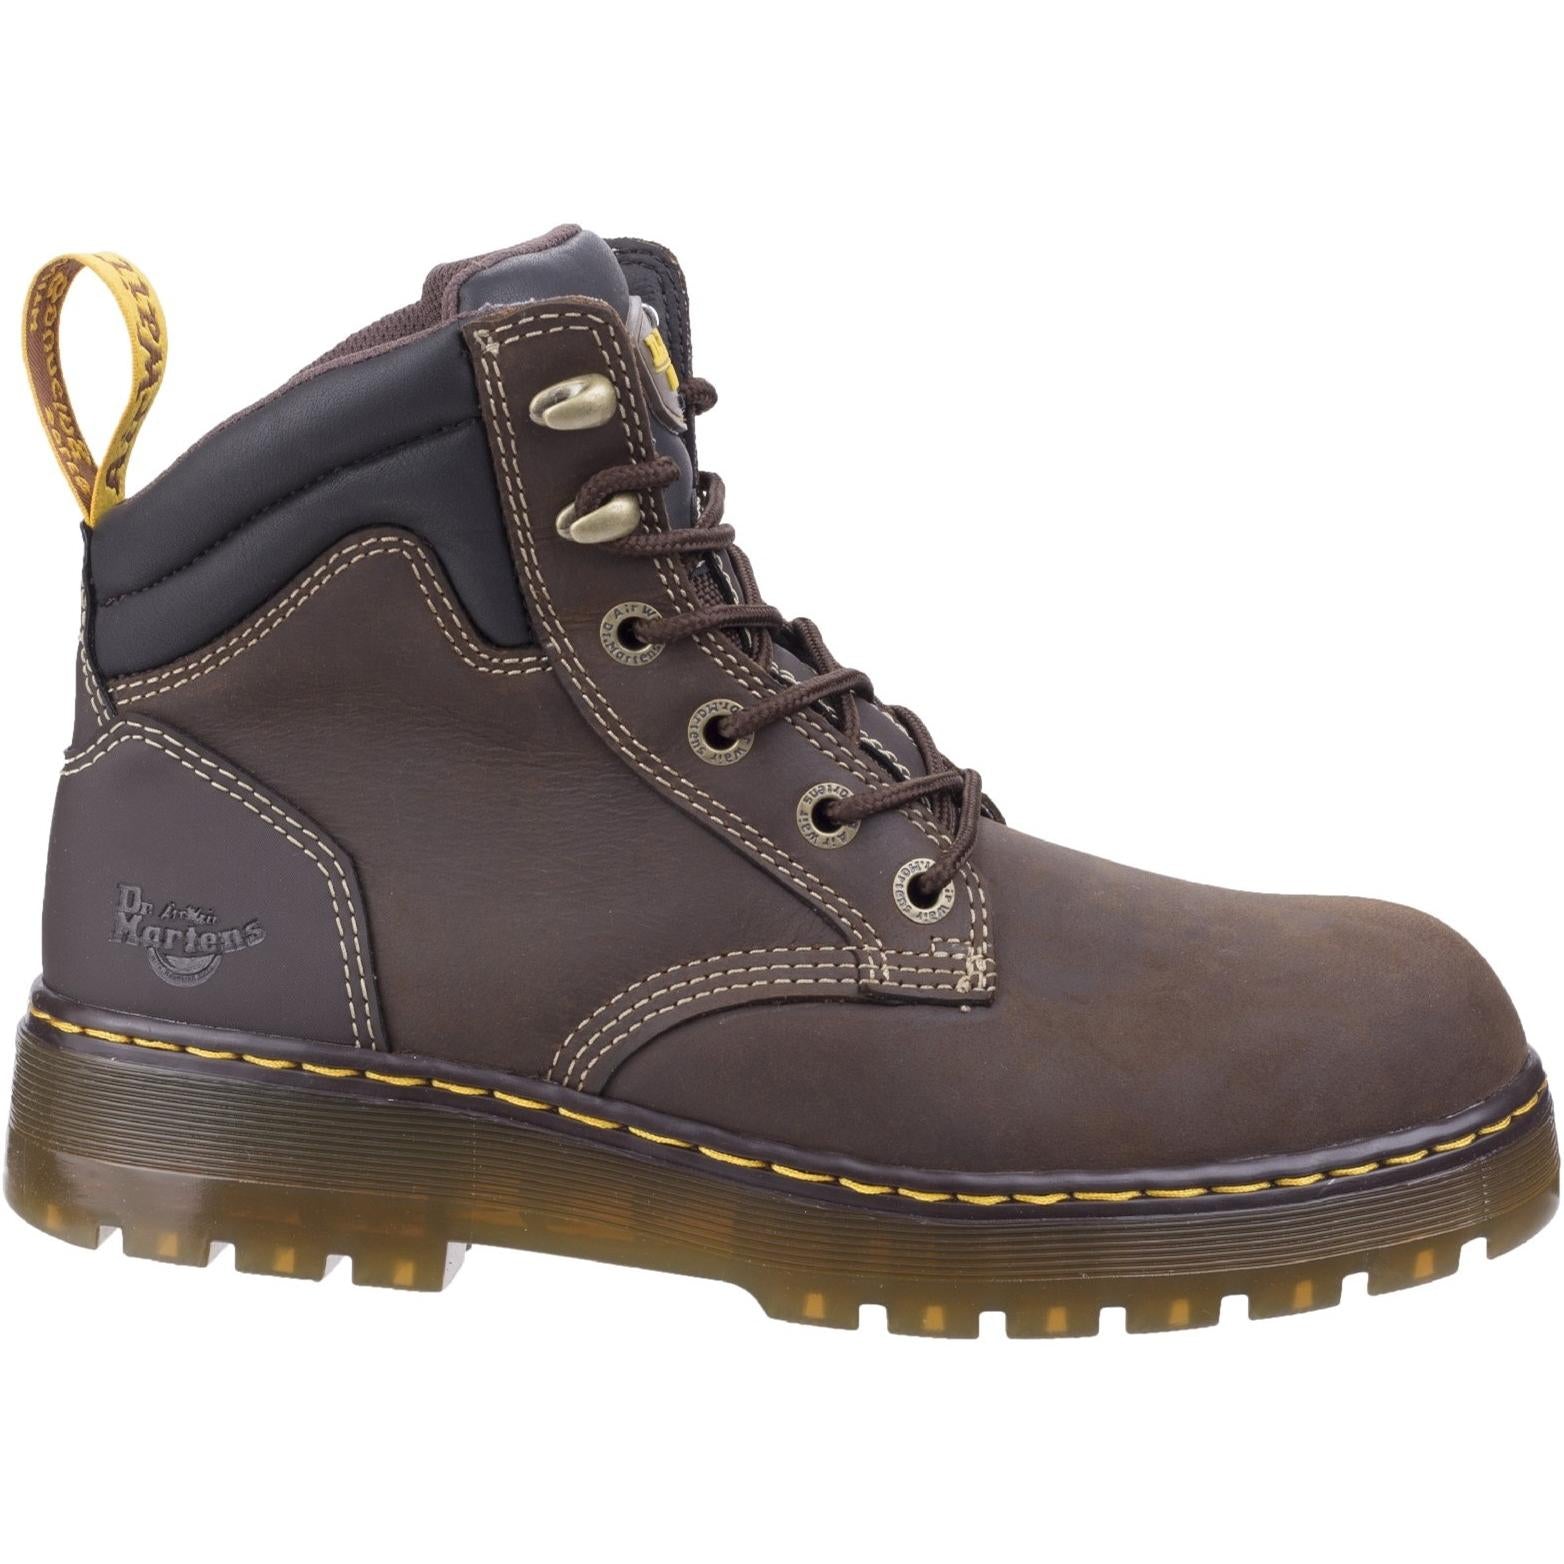 Dr Martens Brace Hiking Style Safety Boot